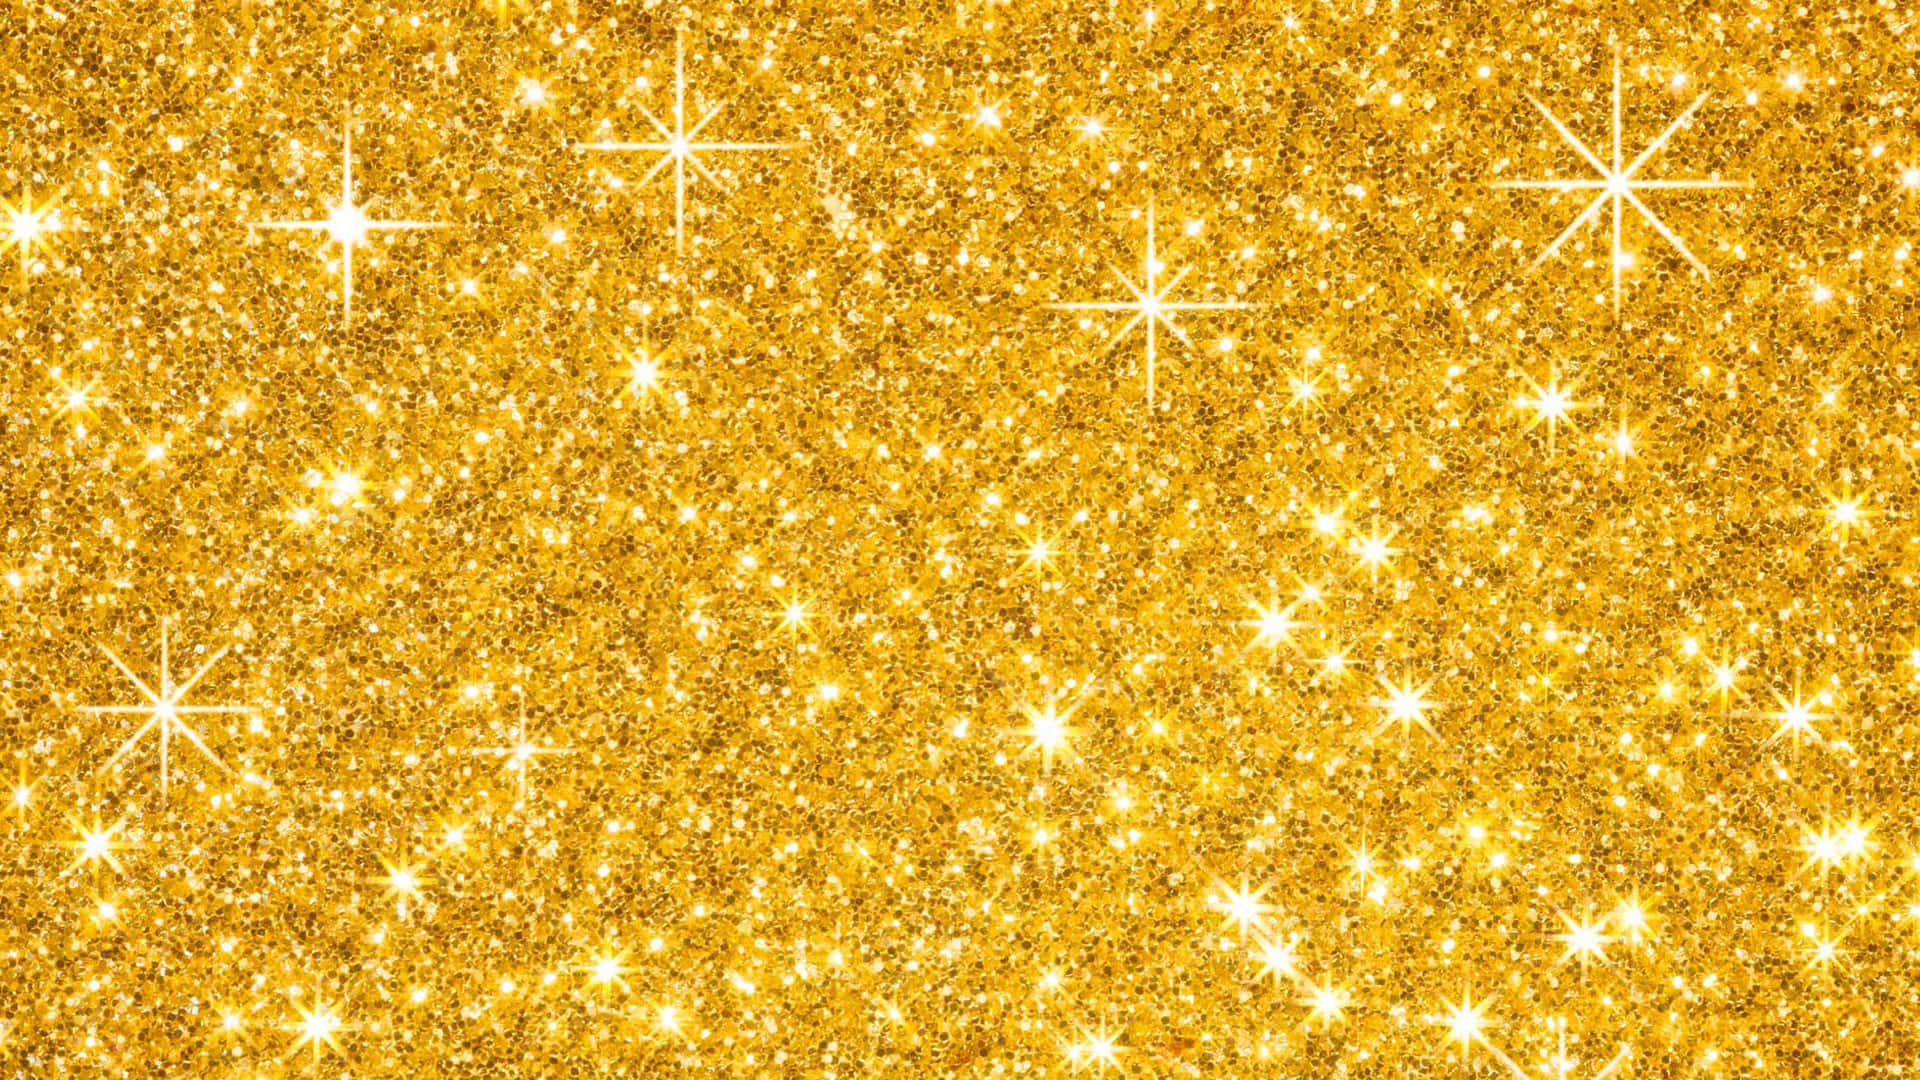 Intense Scintillating Gold Glitter Picture